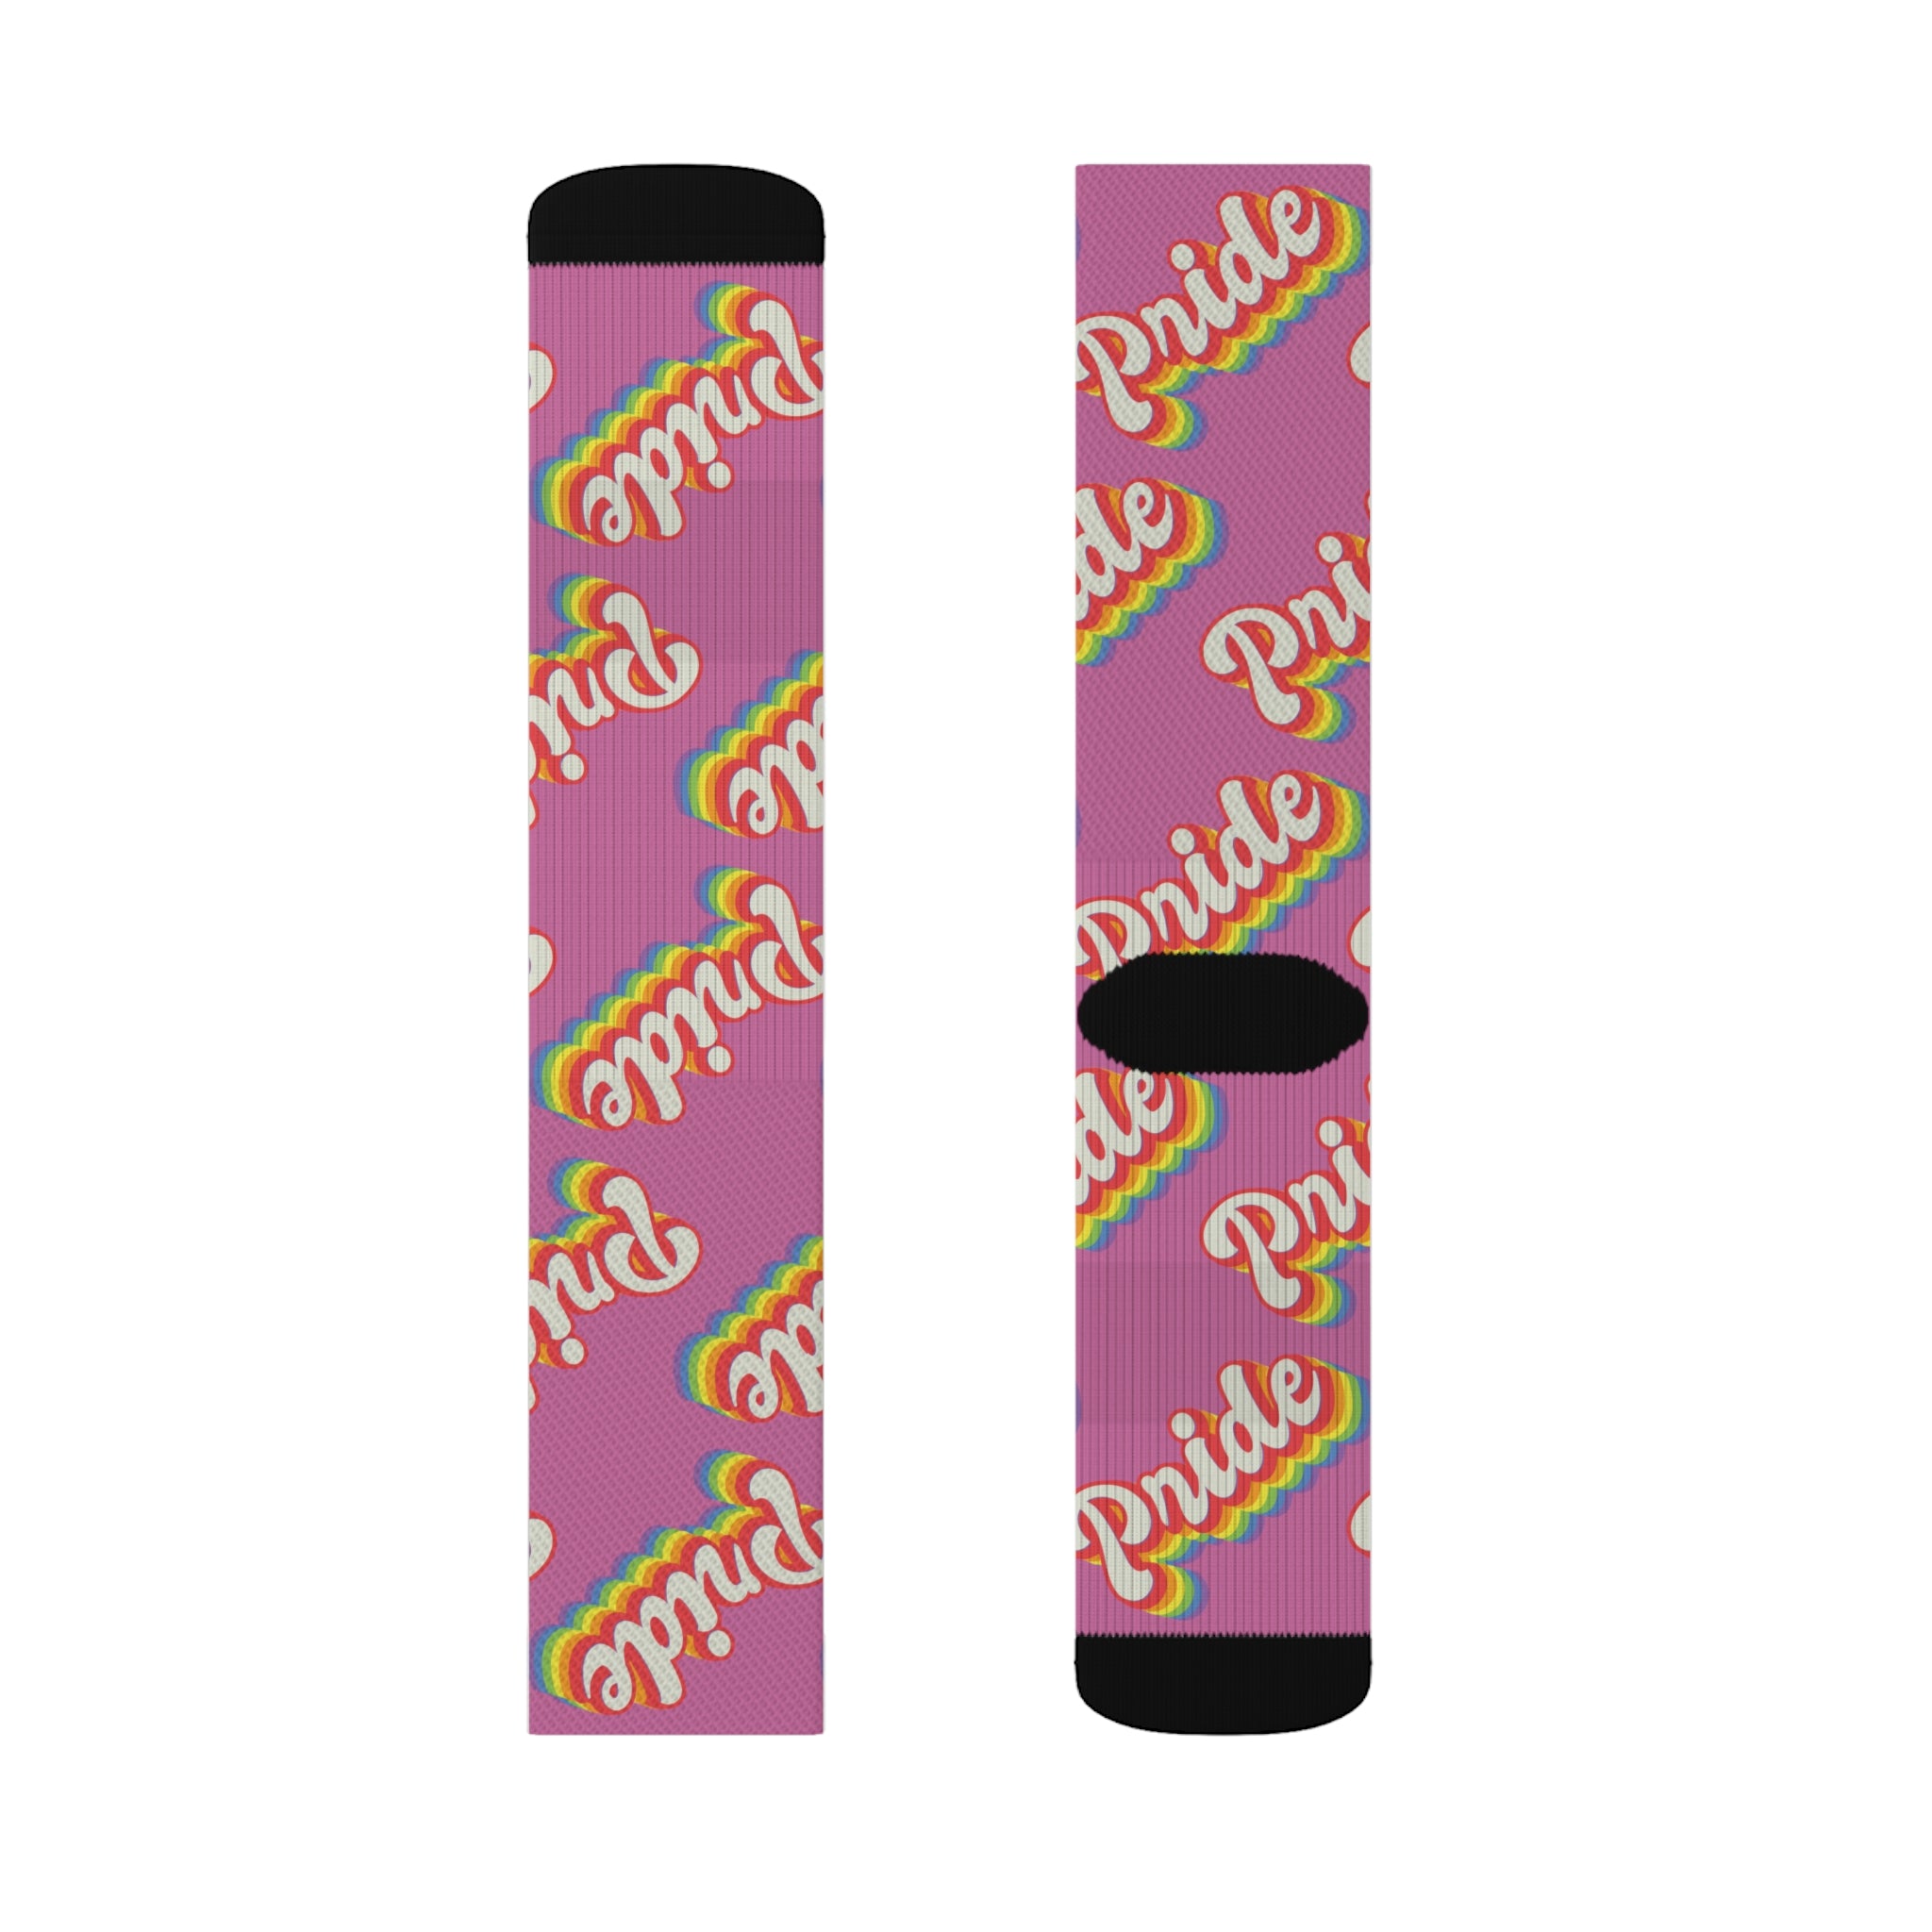 A pair of Pride Socks featuring a sublimated print for maximum comfort.